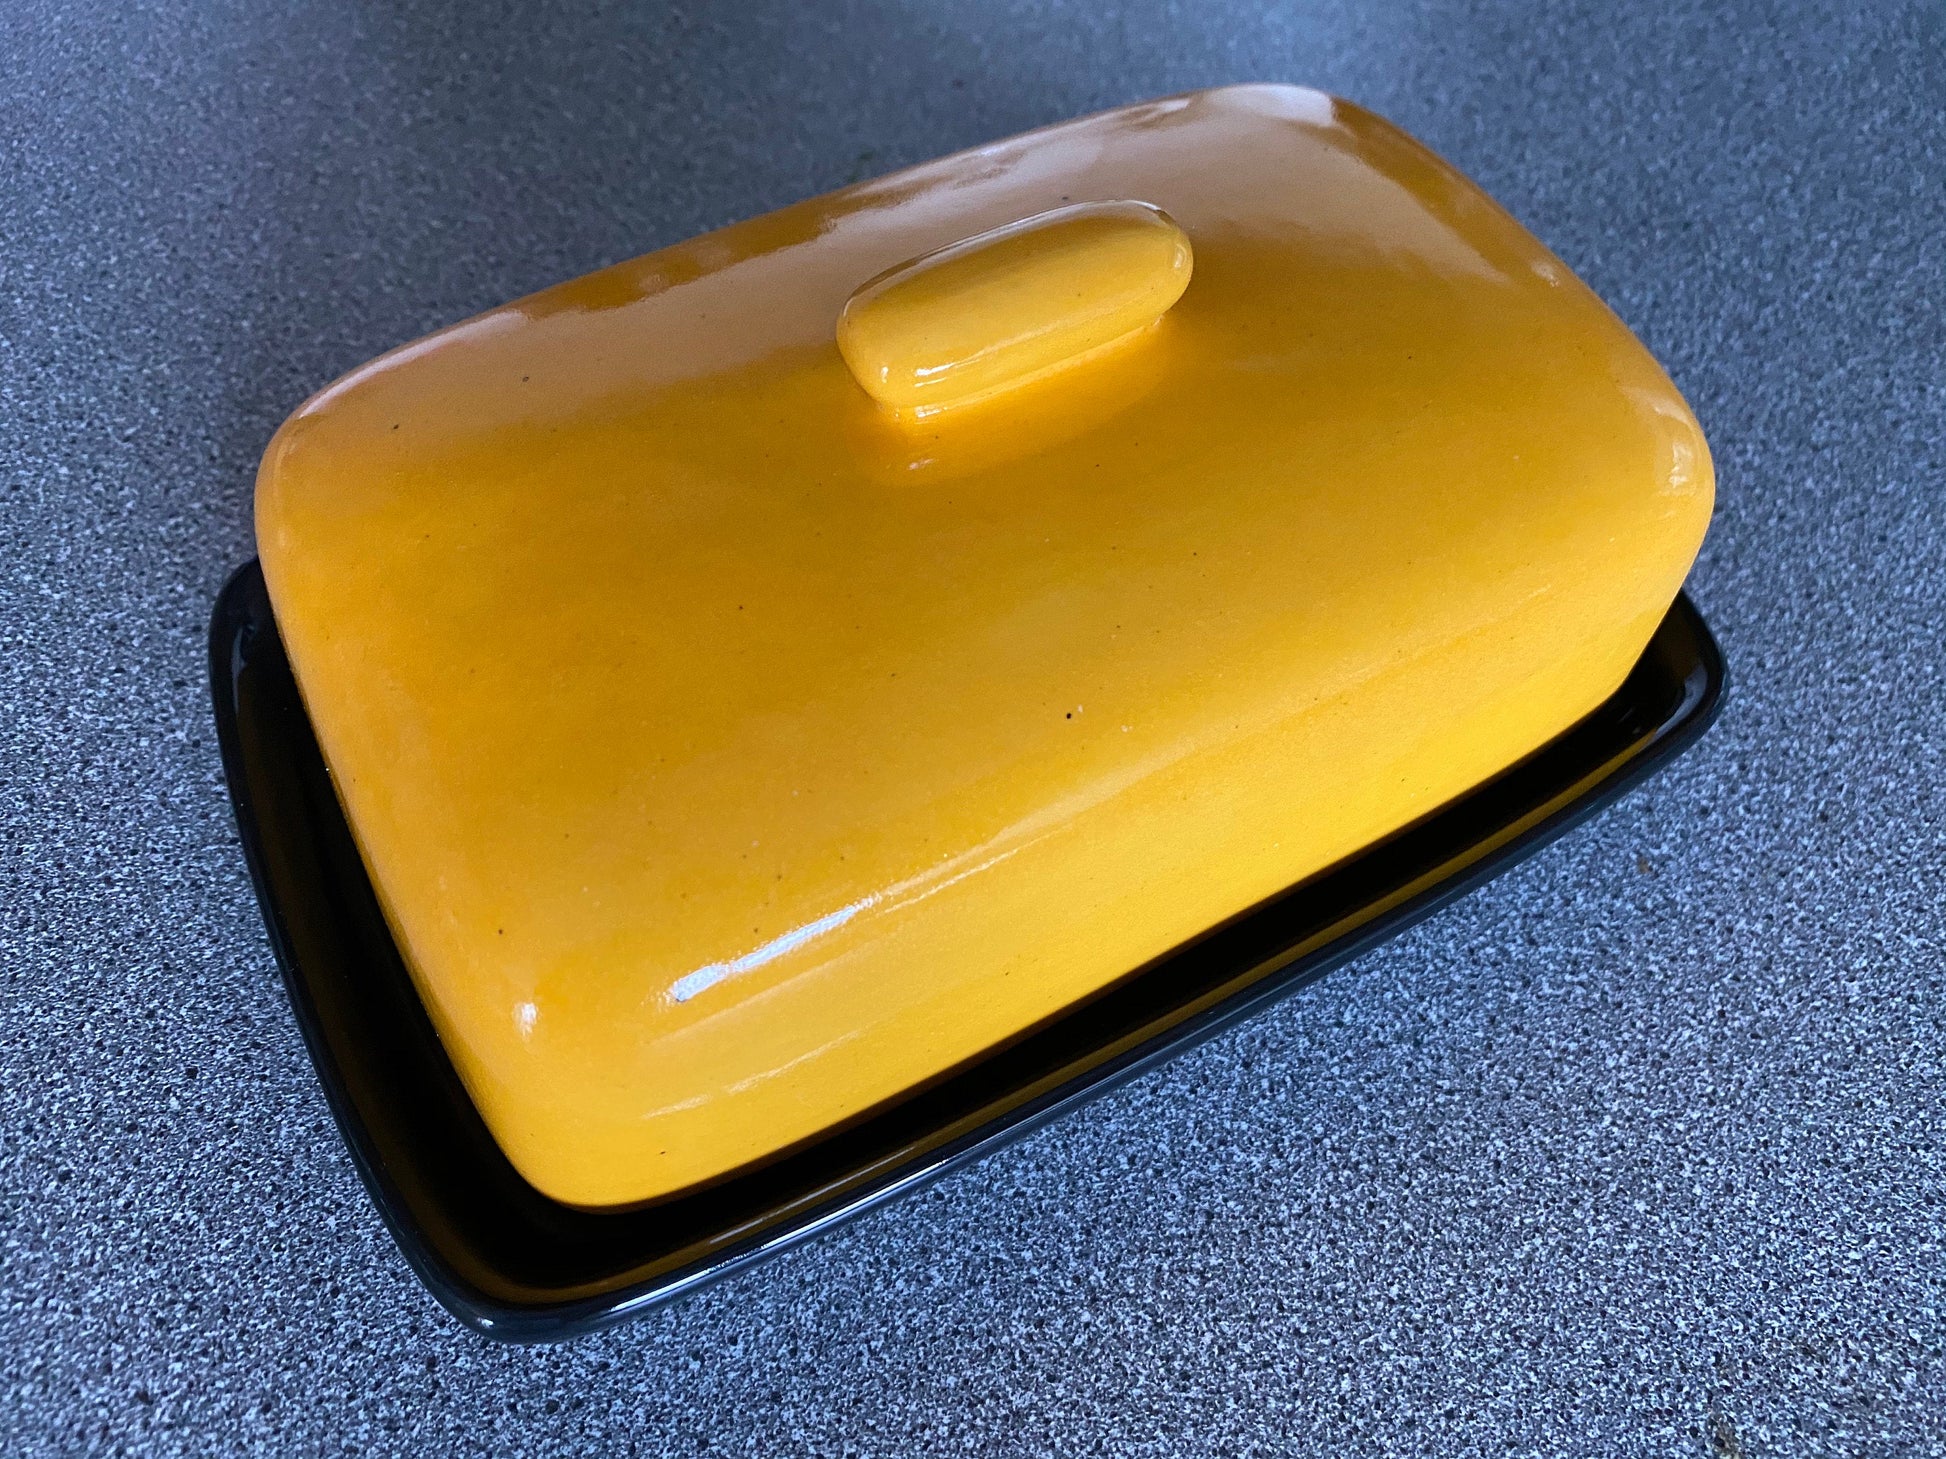 Ceramic Butter Dish with Yellow Lid and Jet Black Glossy Dish - PeterBowenArt